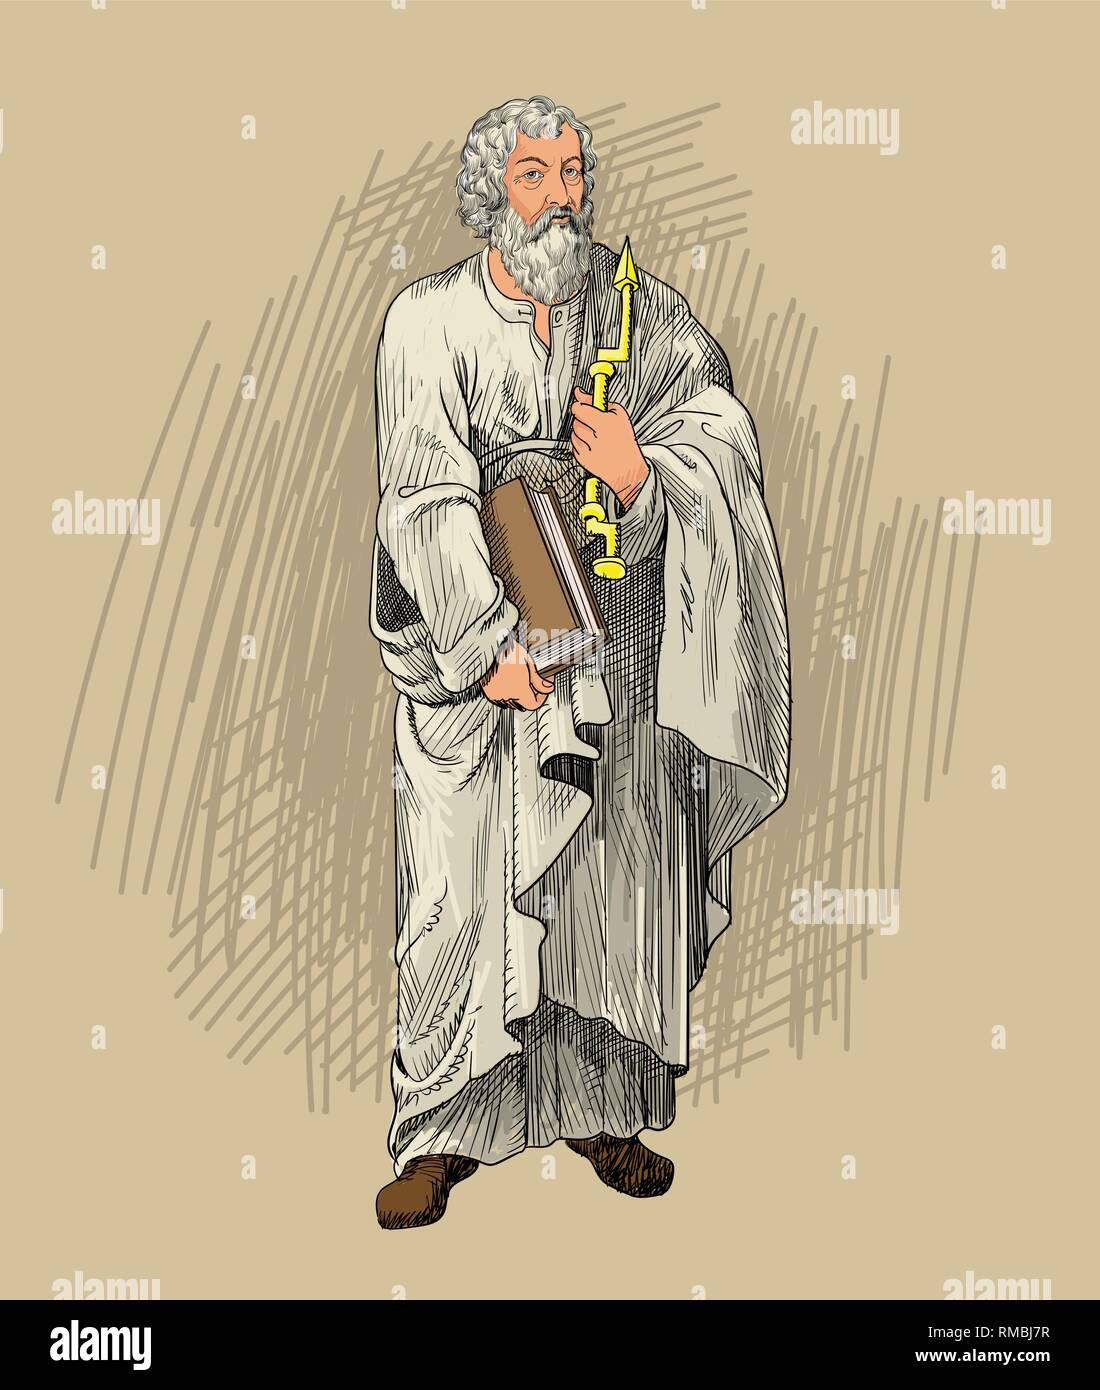 Hippocrates portrait in line art illustration. He was a Greek philosopher and physician who has been called 'the father of modern medicine'. Stock Vector